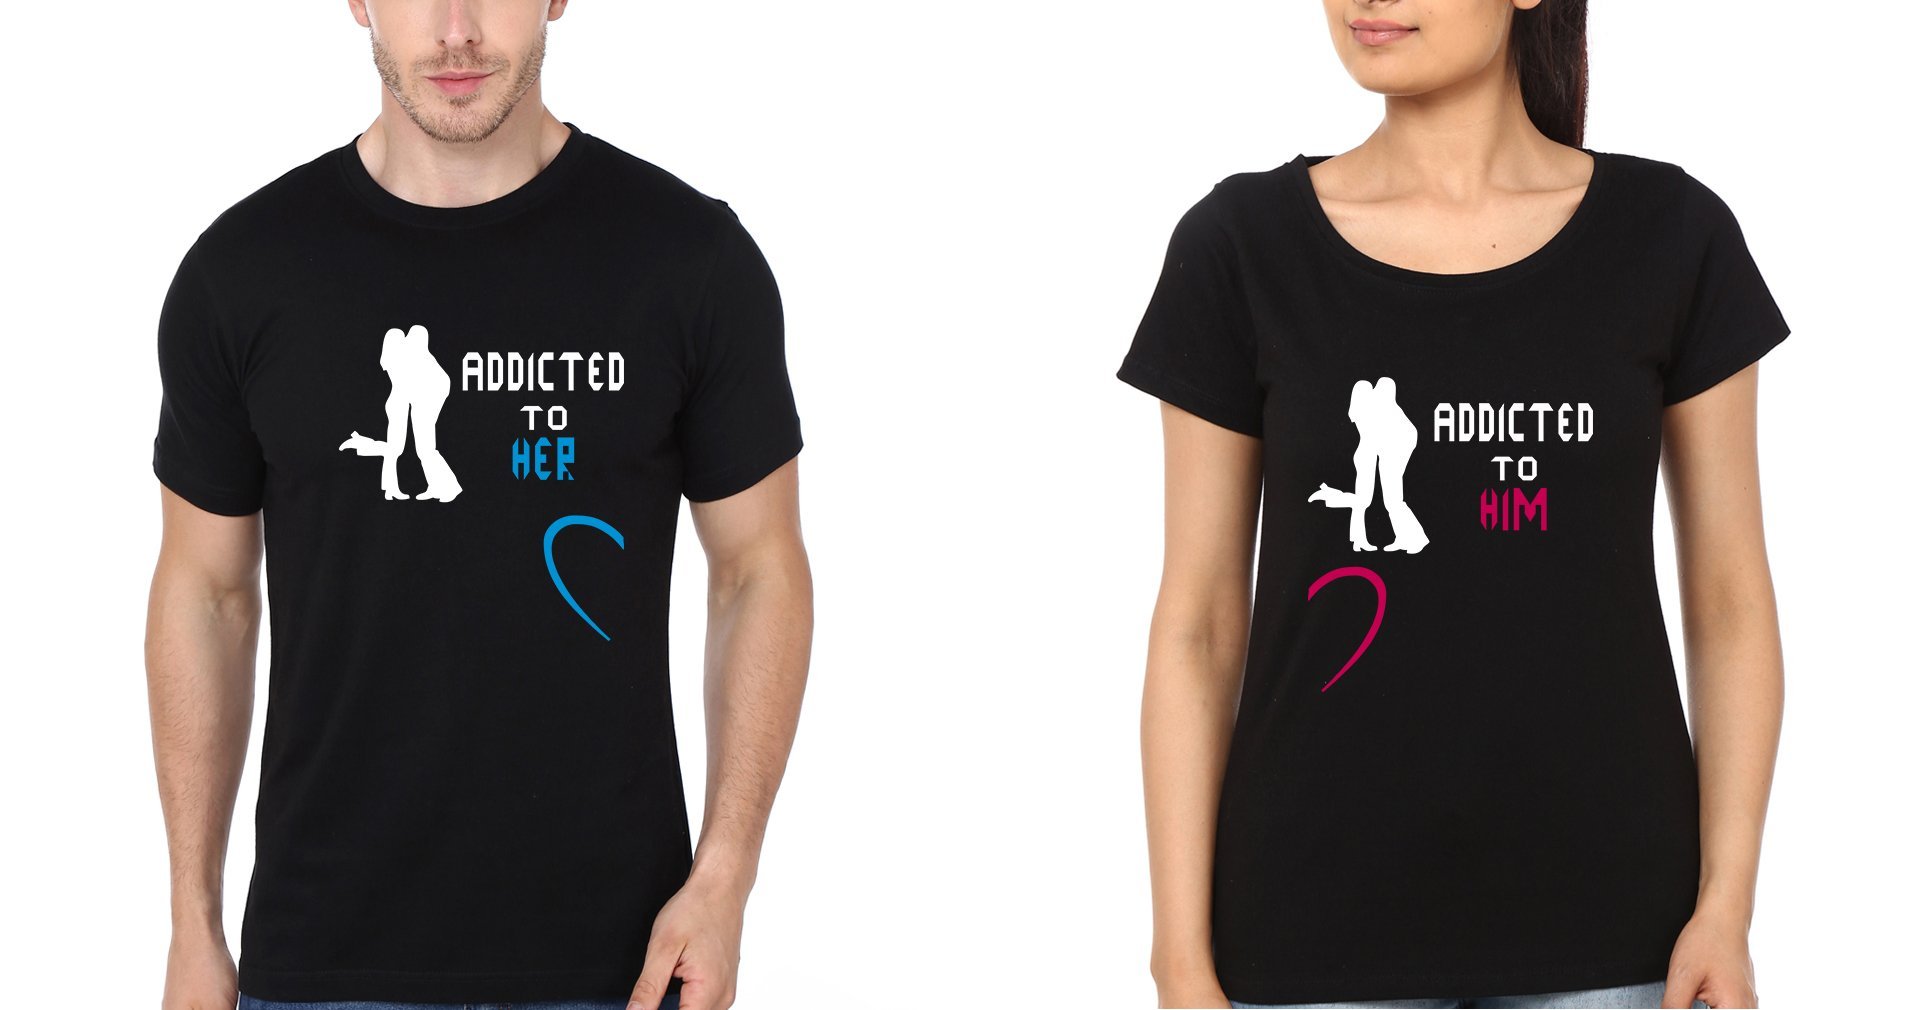 Addicted to her him Couple Half Sleeves T-Shirts -FunkyTees - Funky Tees Club